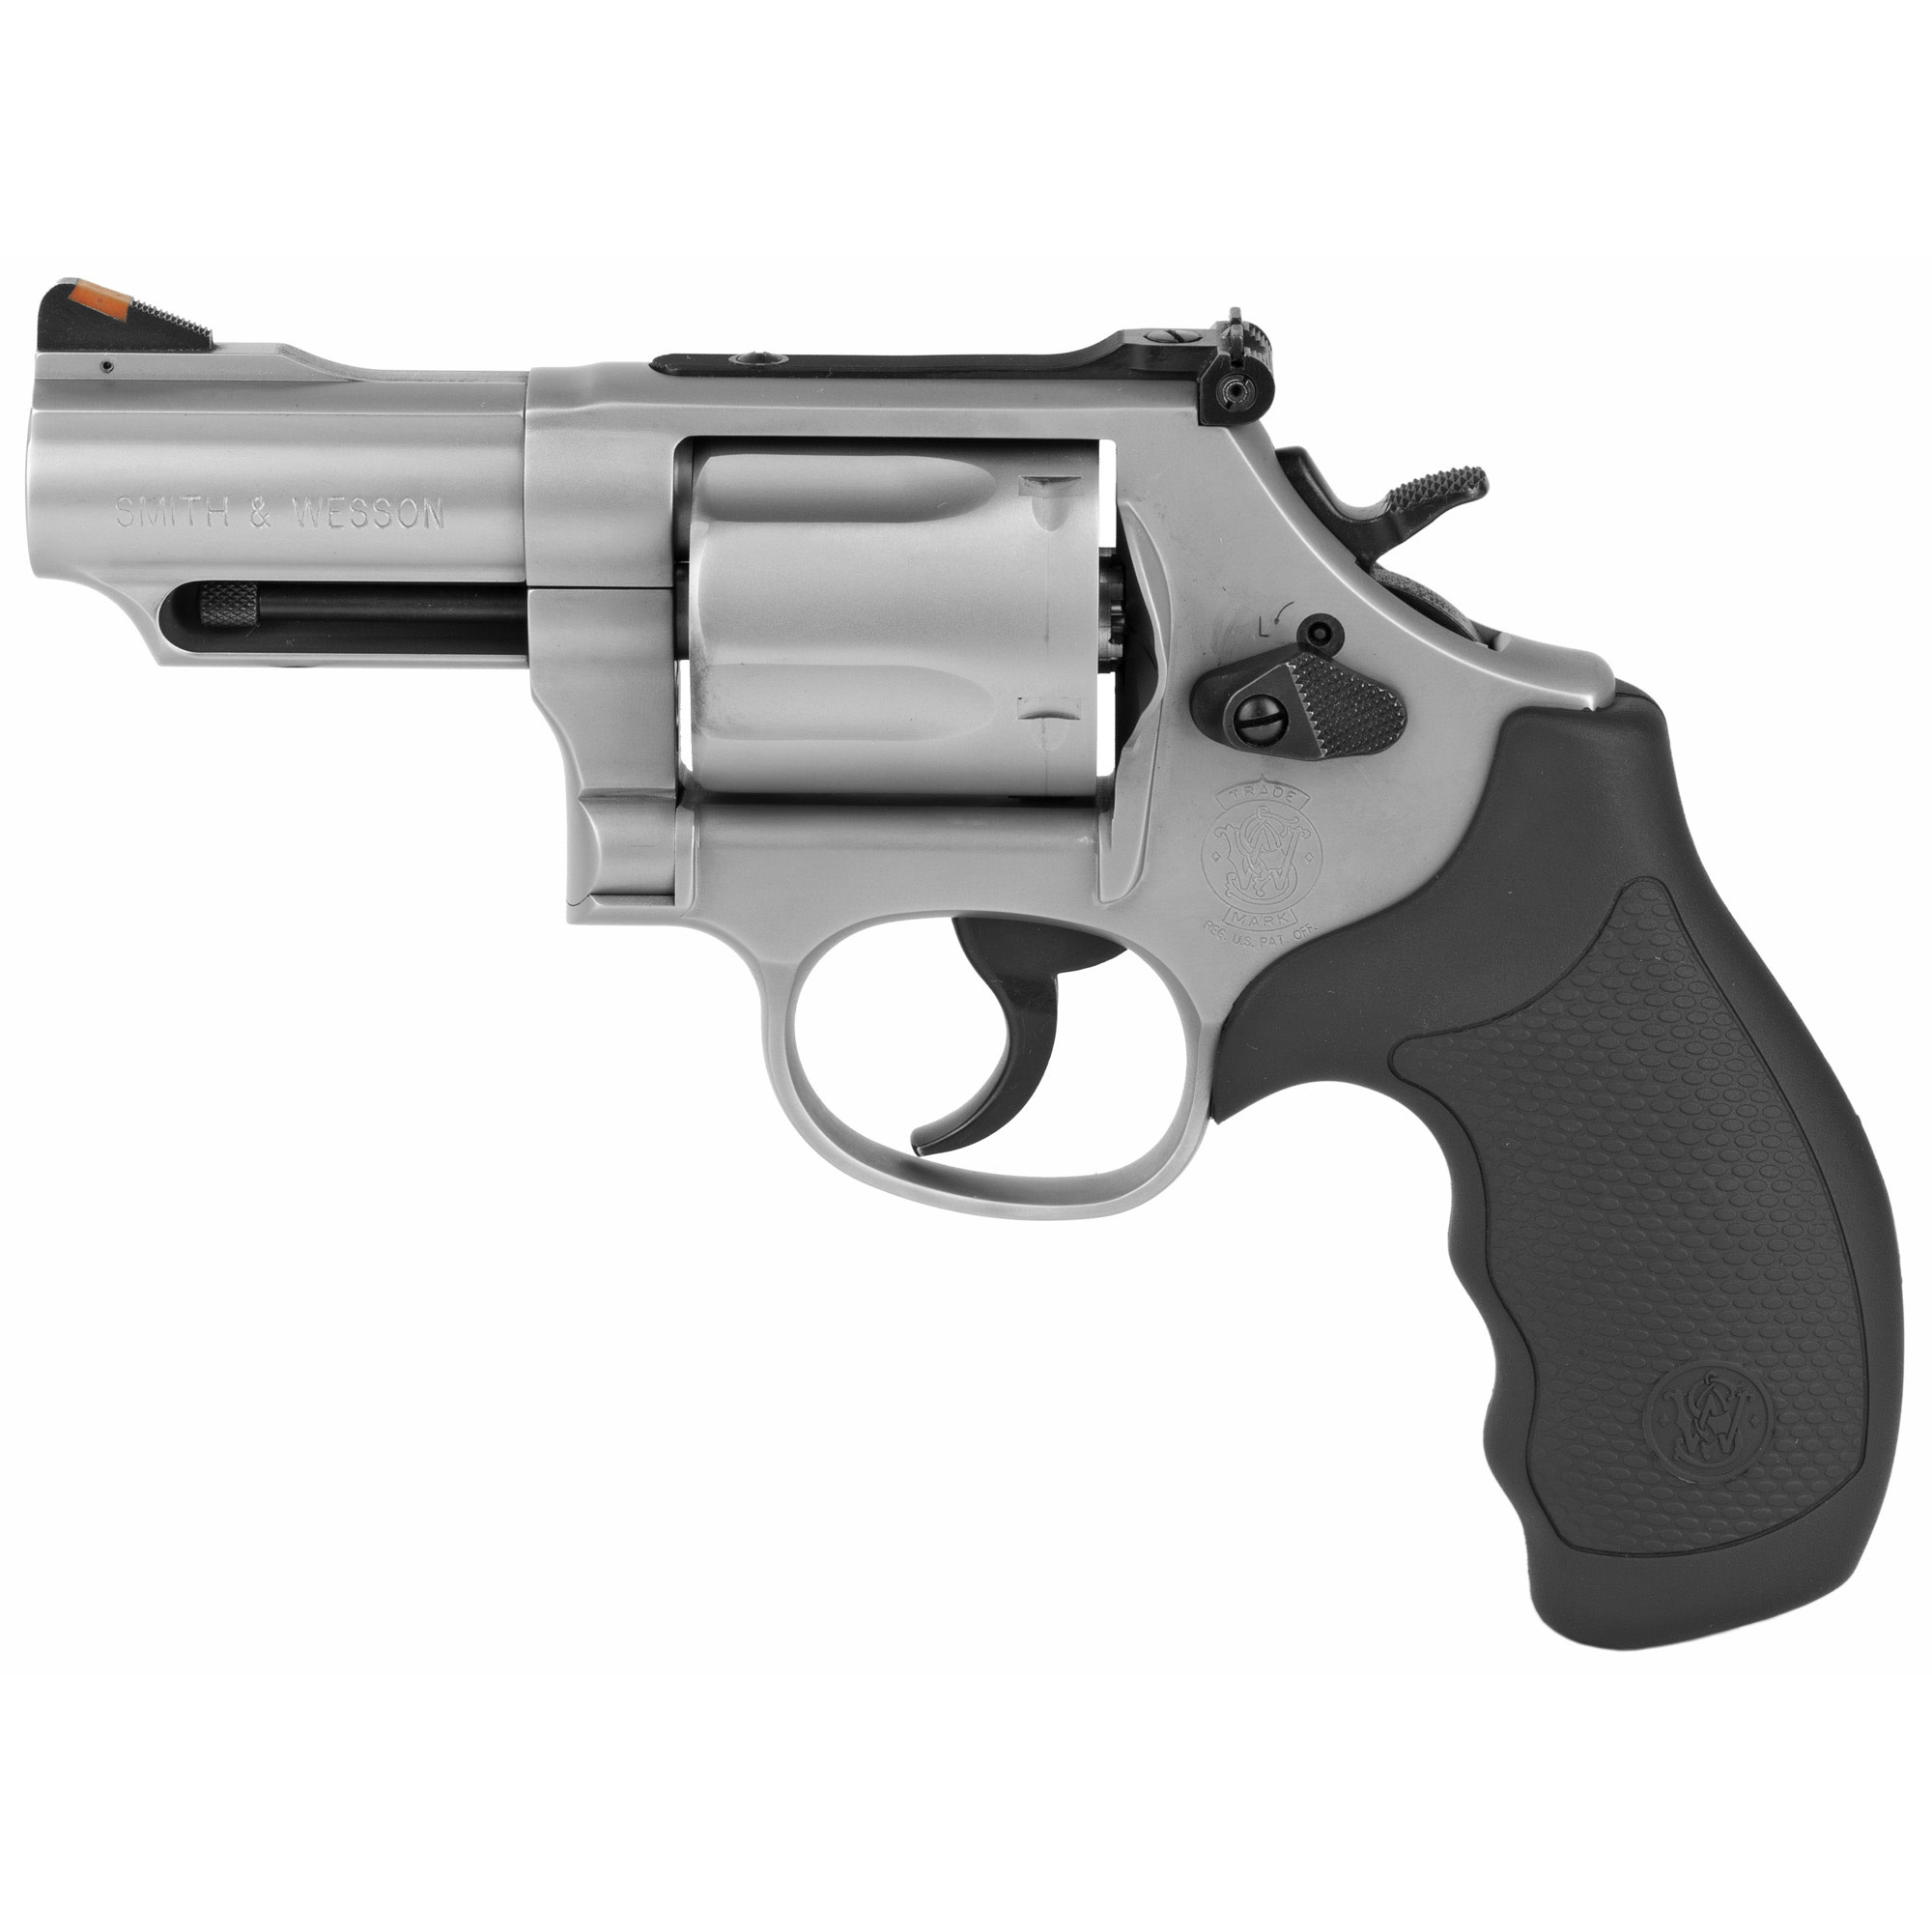 Smith & Wesson, Model 69 .44 Mag 2.75" SS/BLK  5RD Revolver